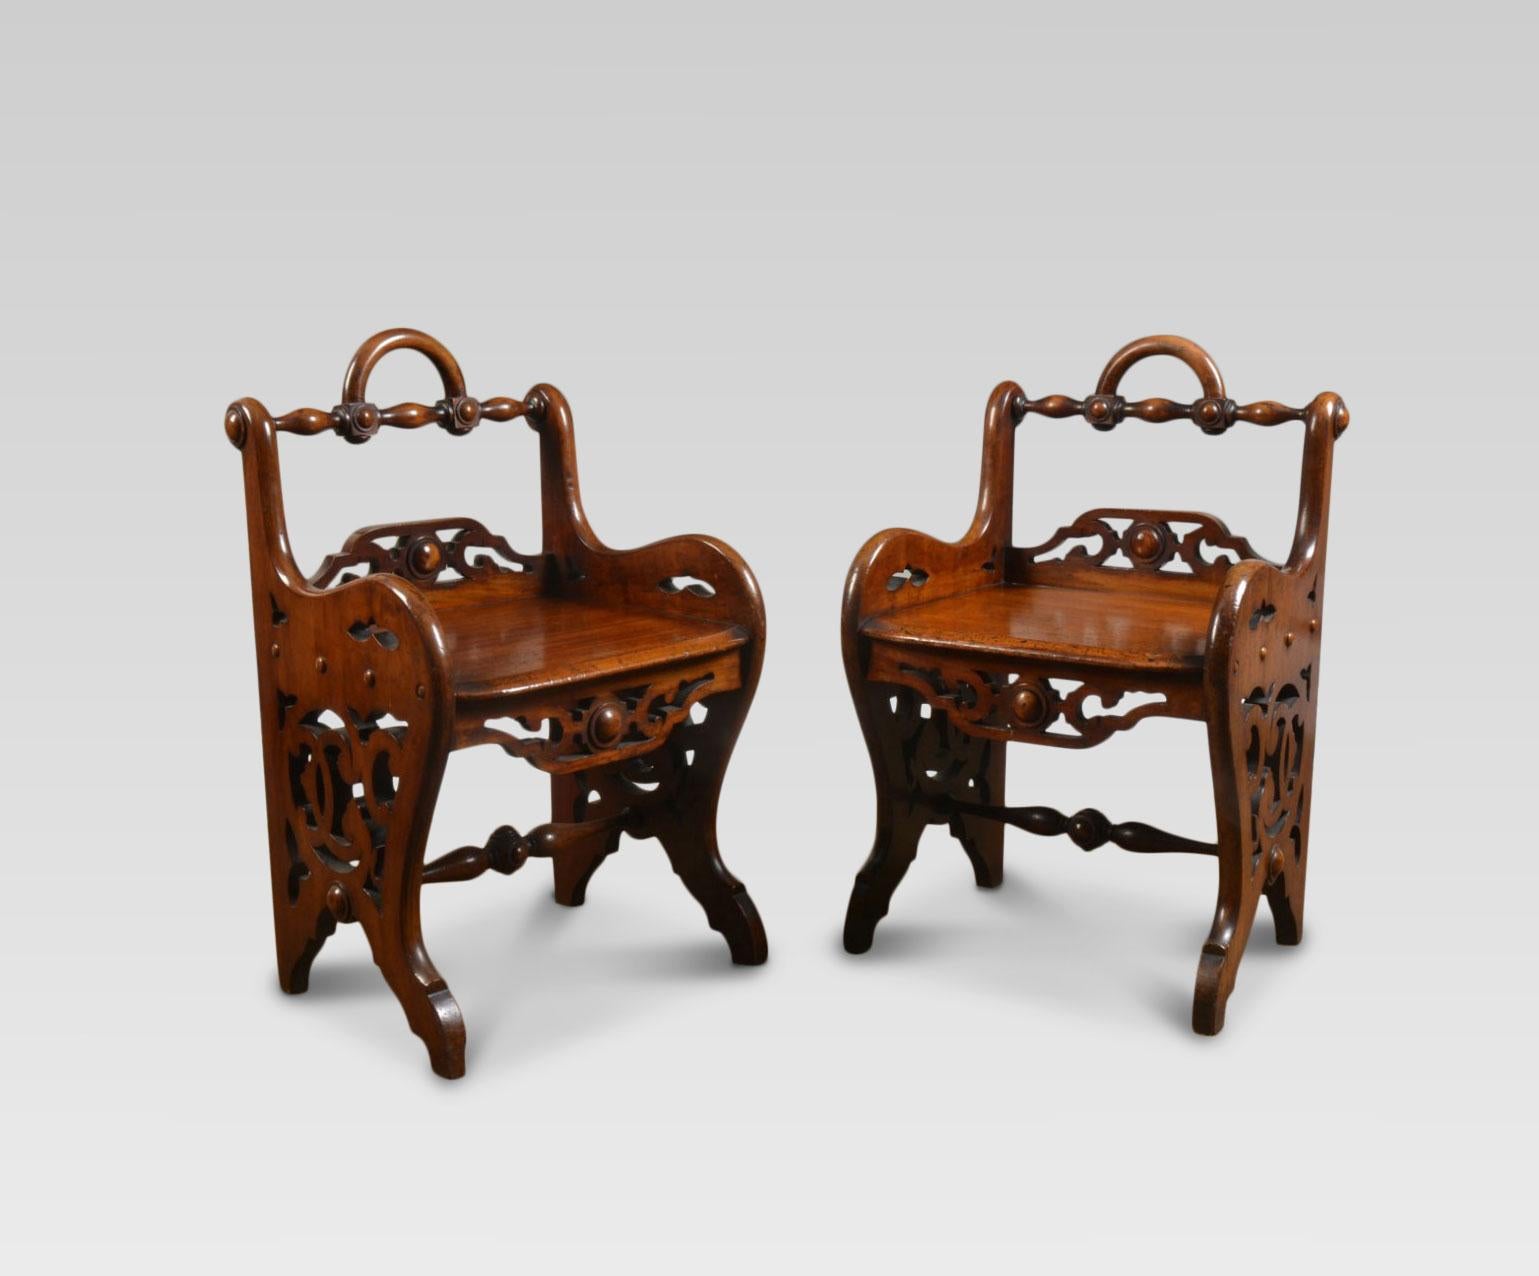 Pair of early Victorian mahogany hall chairs in the manner of Richard Bridgens. Each with a turned top rail above a pierced quatrefoil and scrolling foliated seat rail.

Dimensions:

Height 30.5 inches, height to seat 16 inches.

Width 18.5